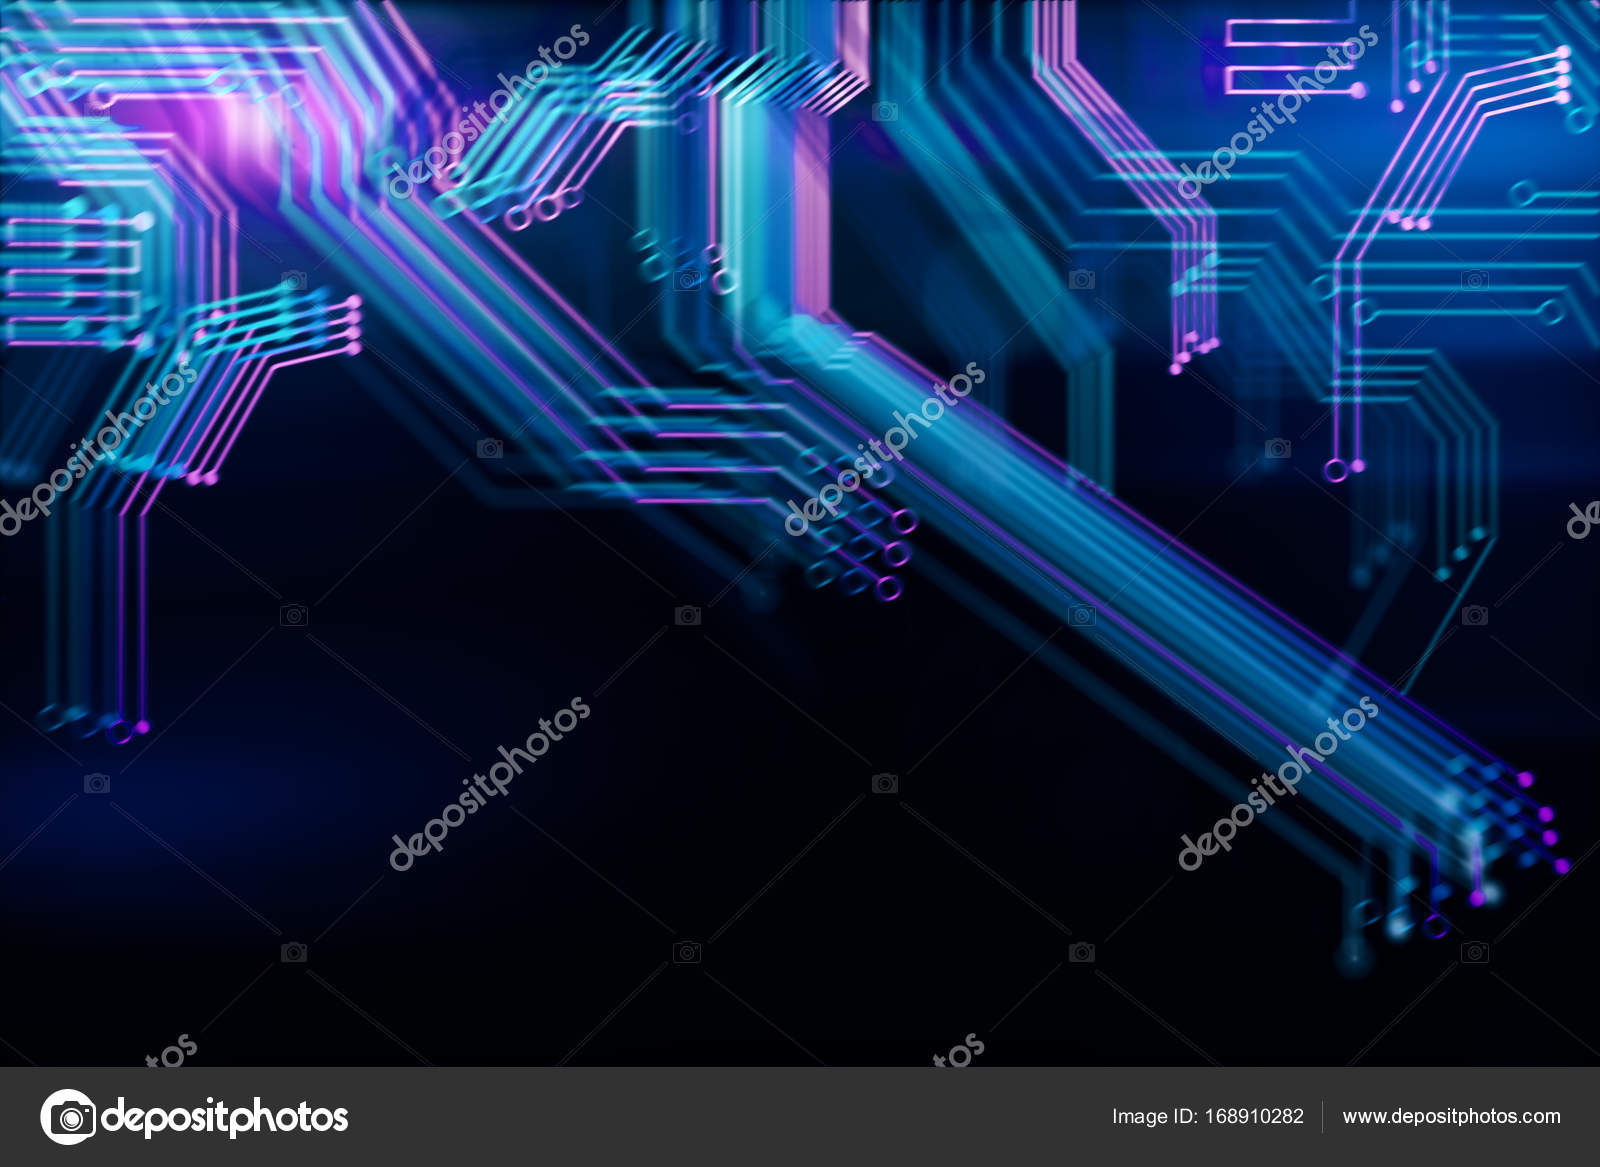 Abstract Digital Blurry Motherboard Wallpaper - Coppia In Vasca Idromassaggio , HD Wallpaper & Backgrounds